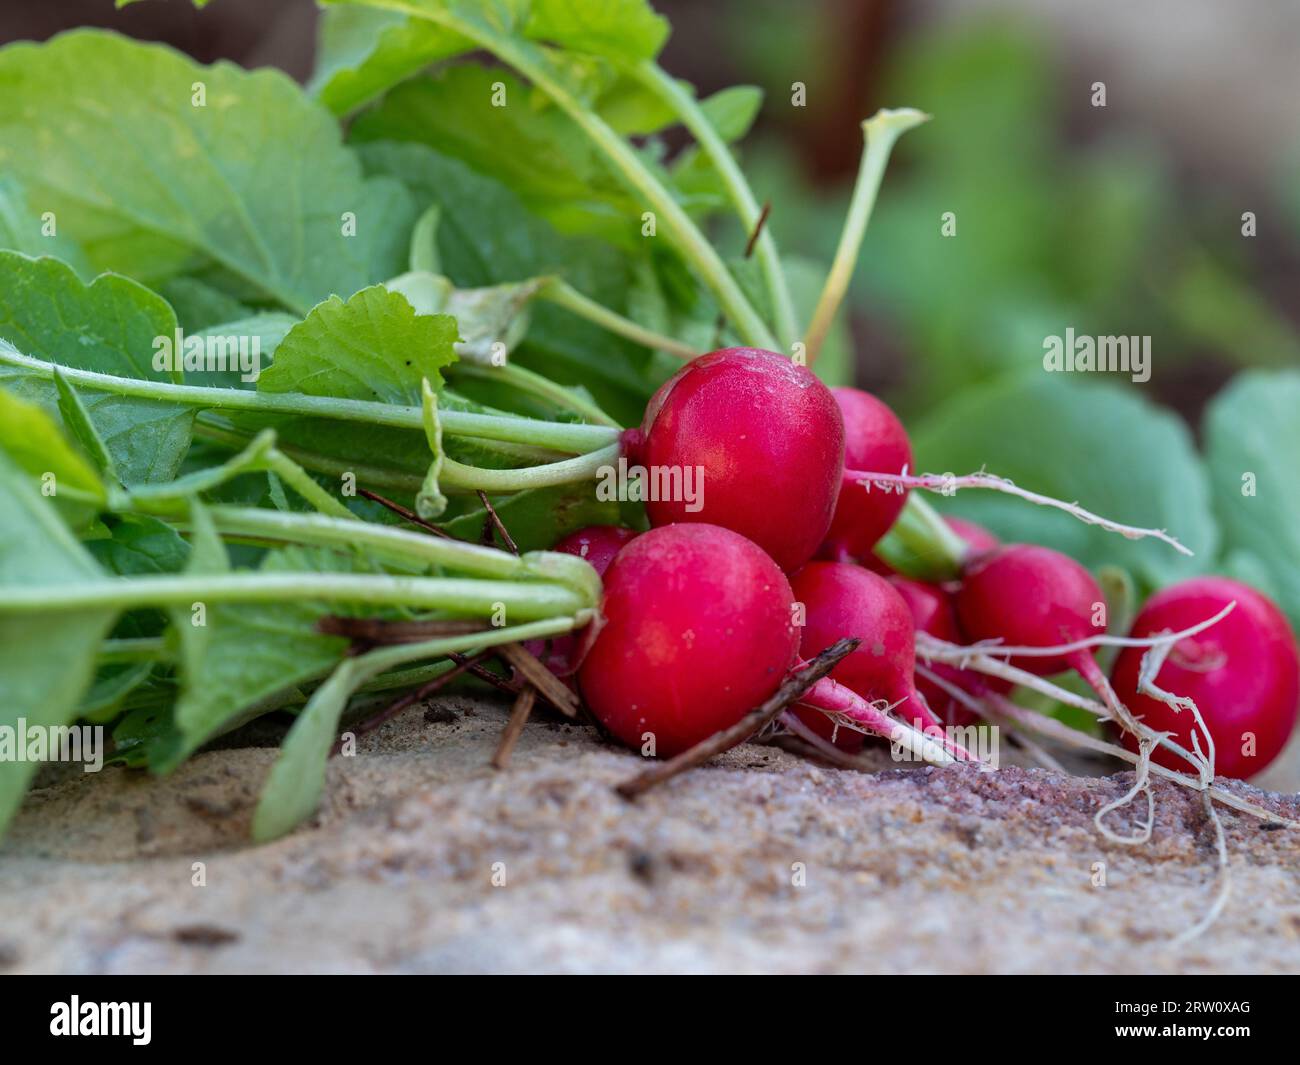 A bunch of red Cherry Belle Radishes with leafy green tops, harvest pulled fresh from the Vegetable garden soil they were growing in Stock Photo